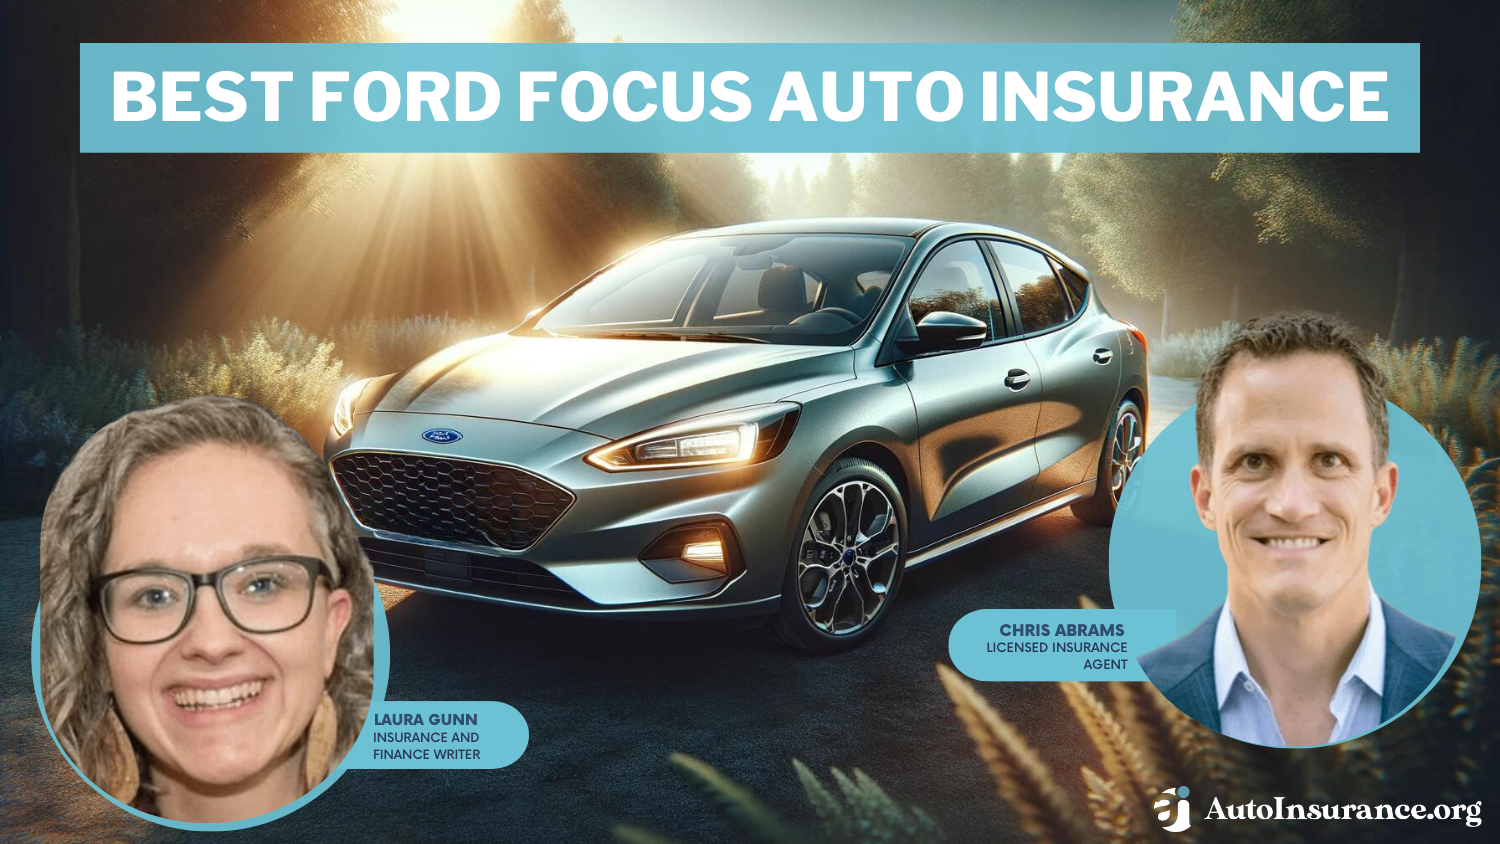 Best Ford Focus Auto Insurance: State Farm, Erie, Allstate